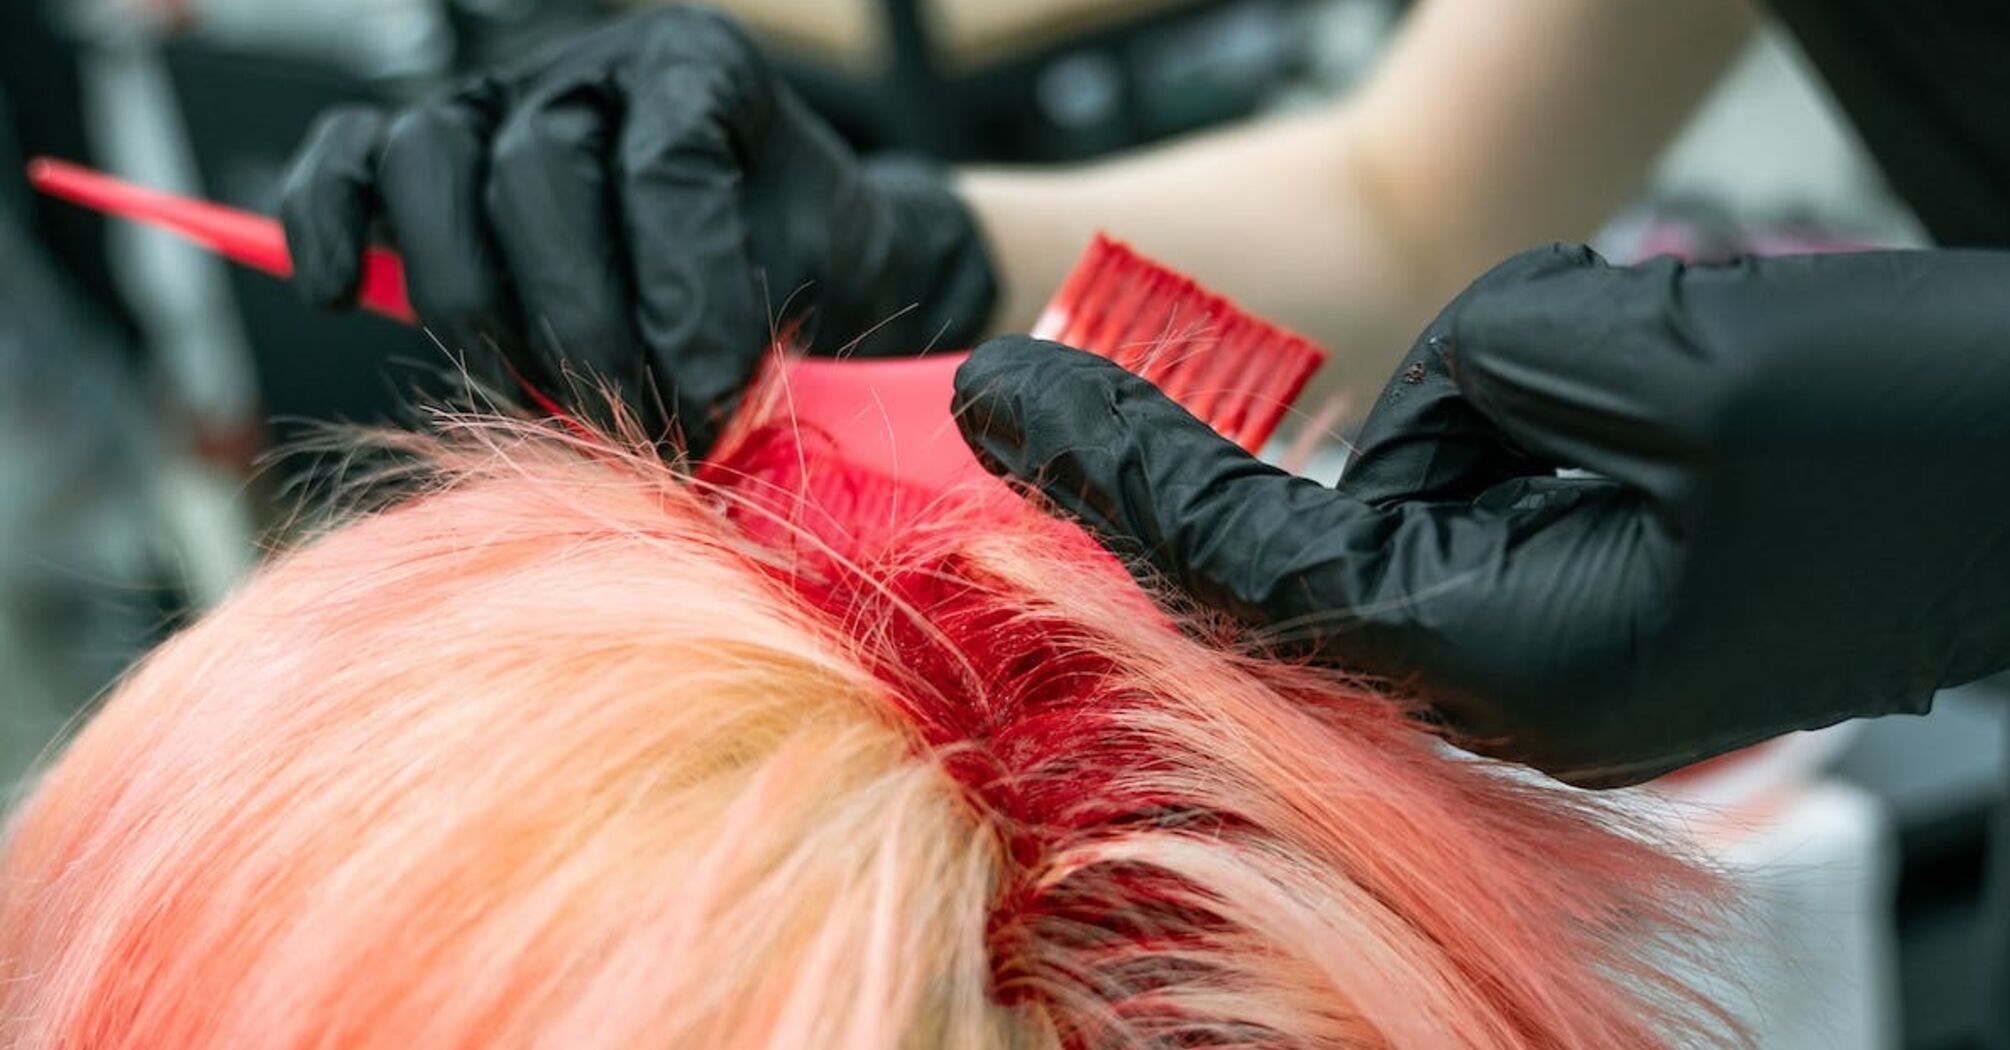 Hairstylists have named 'nasty' hair colors that all women should avoid